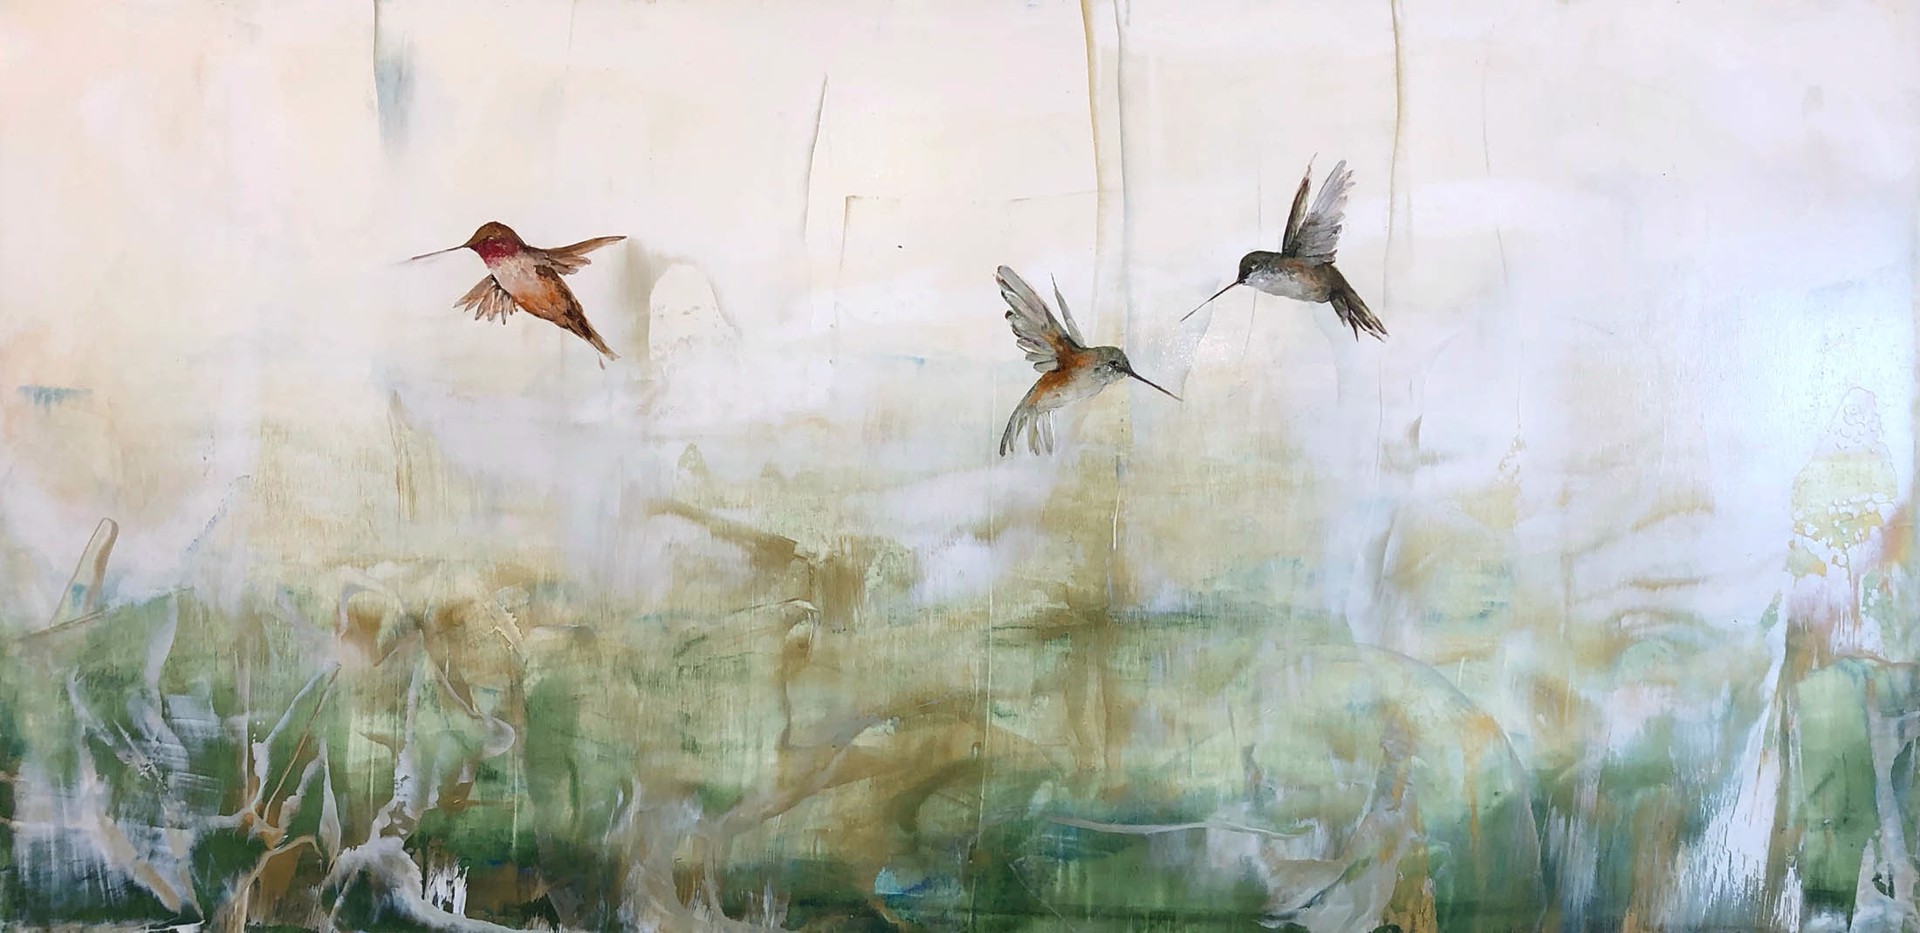 A Contemporary Painting Of Hummingbirds On A Green Abstract Background By Jenna Von Benedikt At Gallery Wild